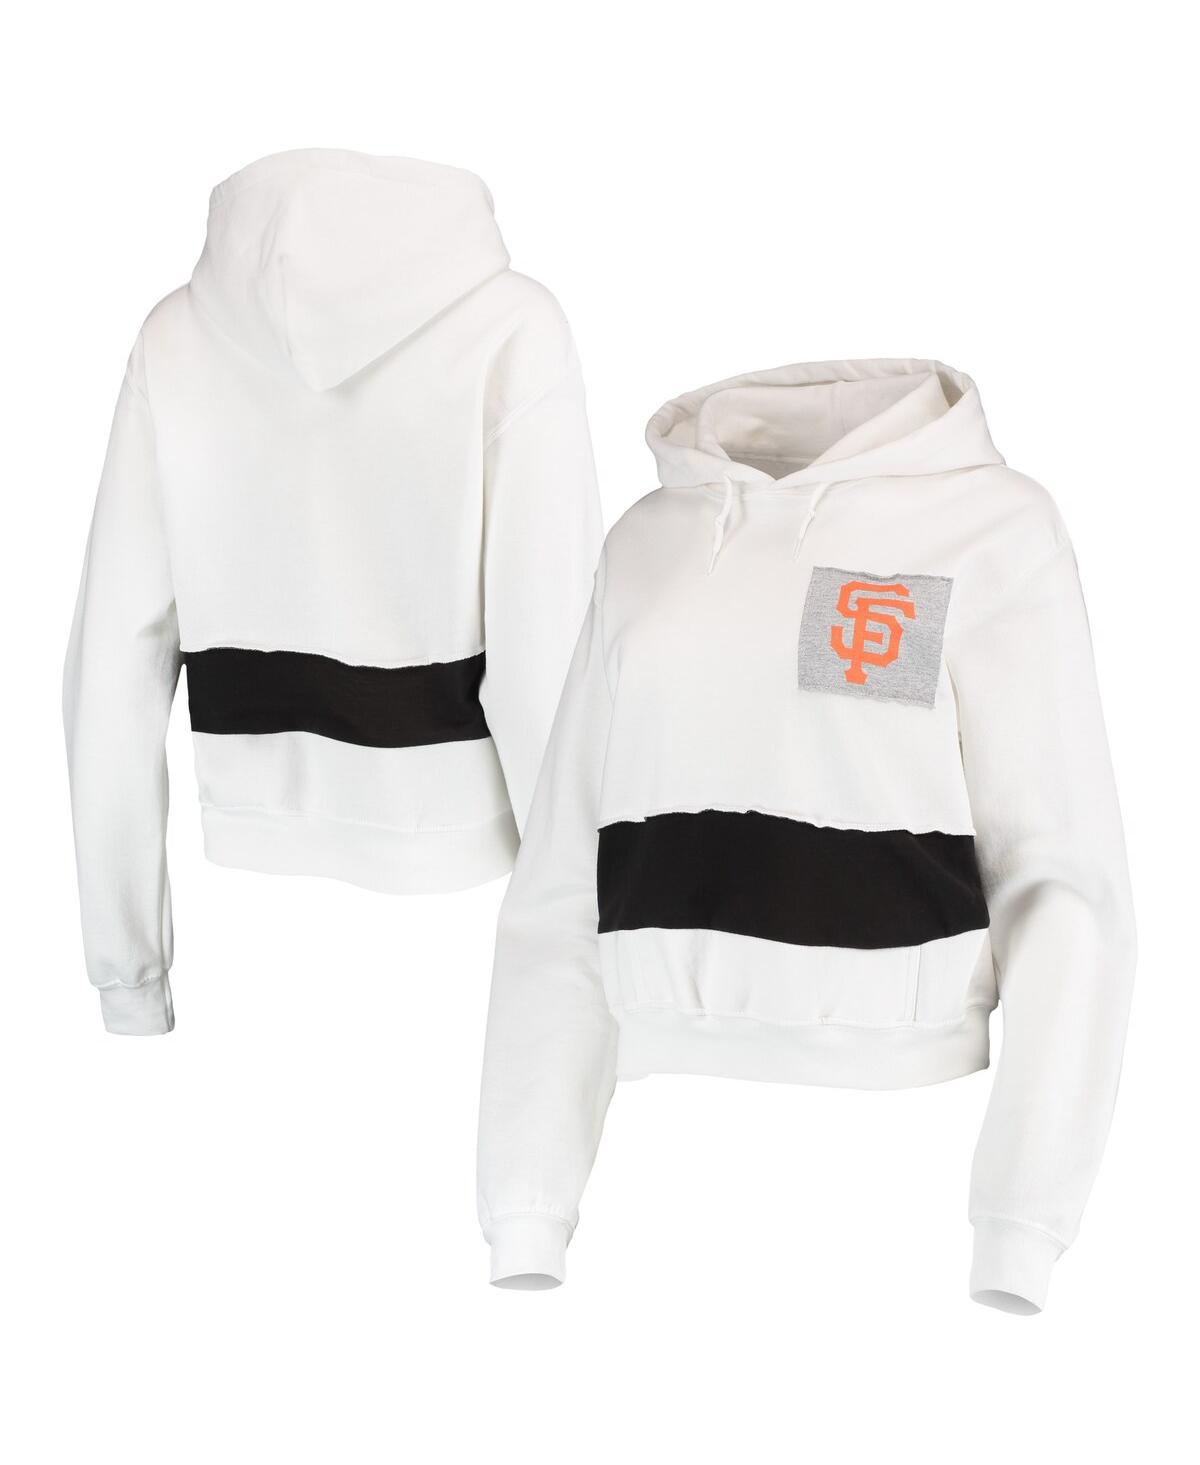 REFRIED APPAREL WOMEN'S REFRIED APPAREL WHITE, BLACK SAN FRANCISCO GIANTS CROPPED PULLOVER HOODIE